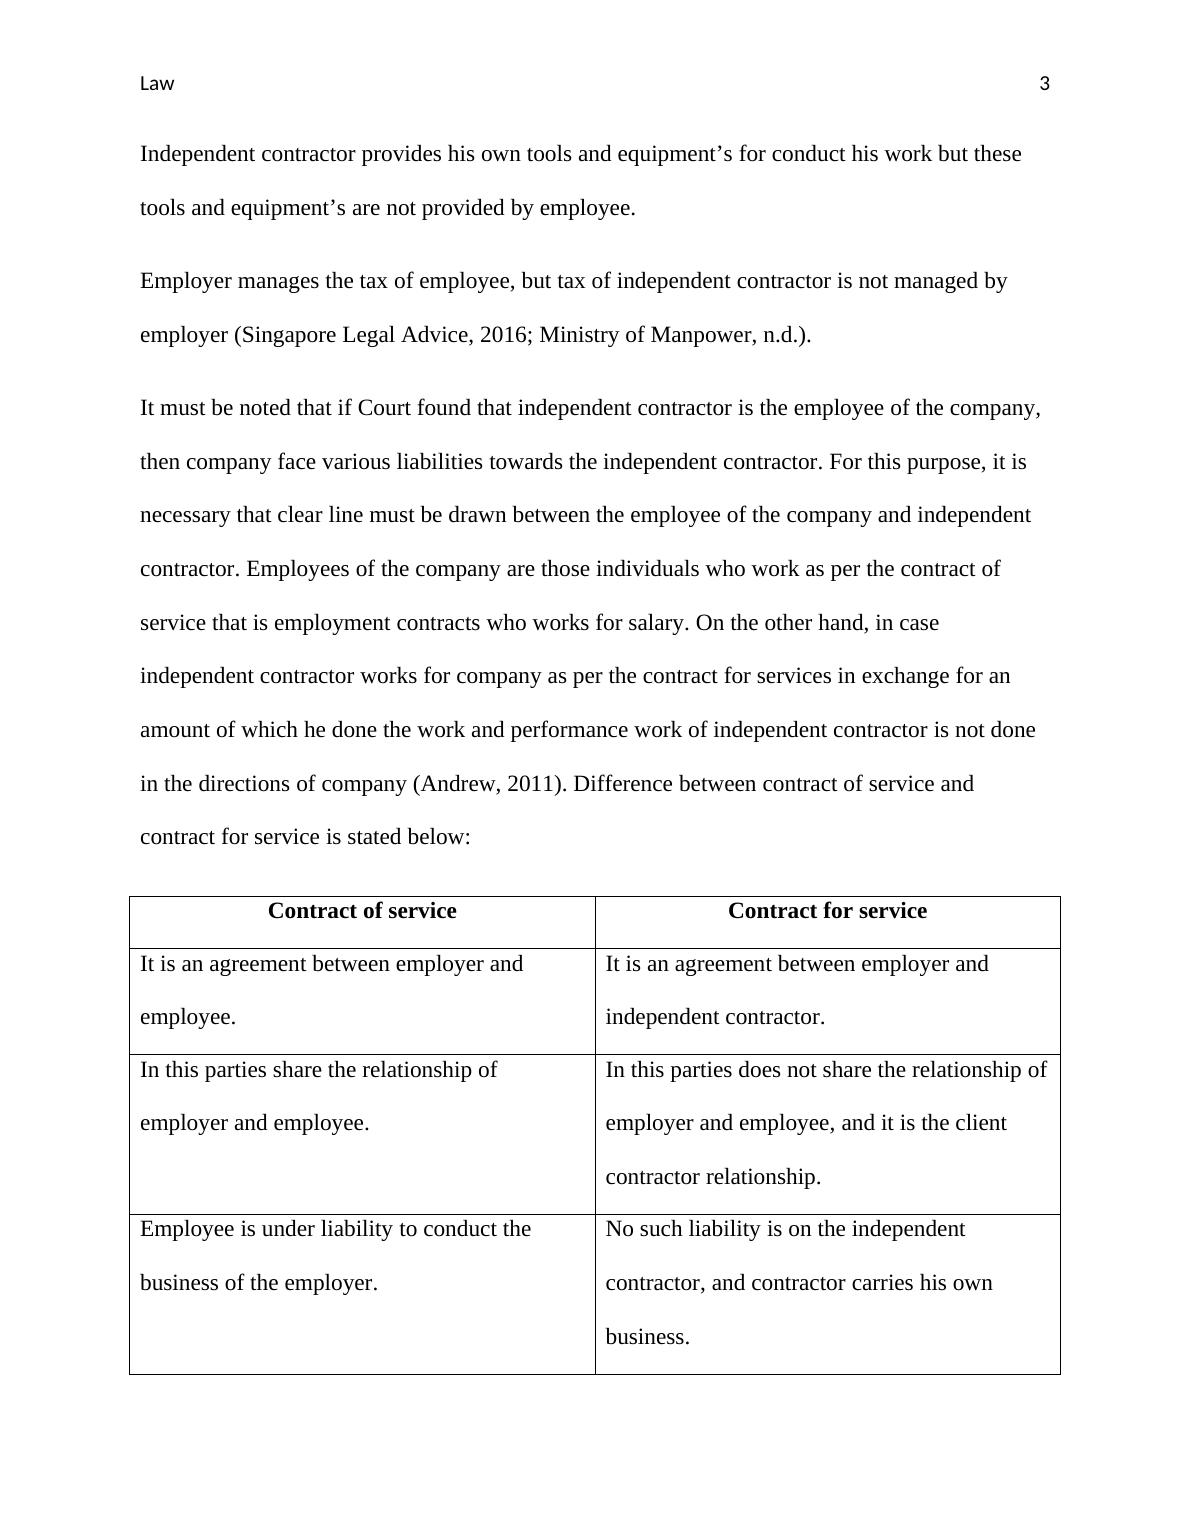 Assignment on Law Issue (Doc)_3